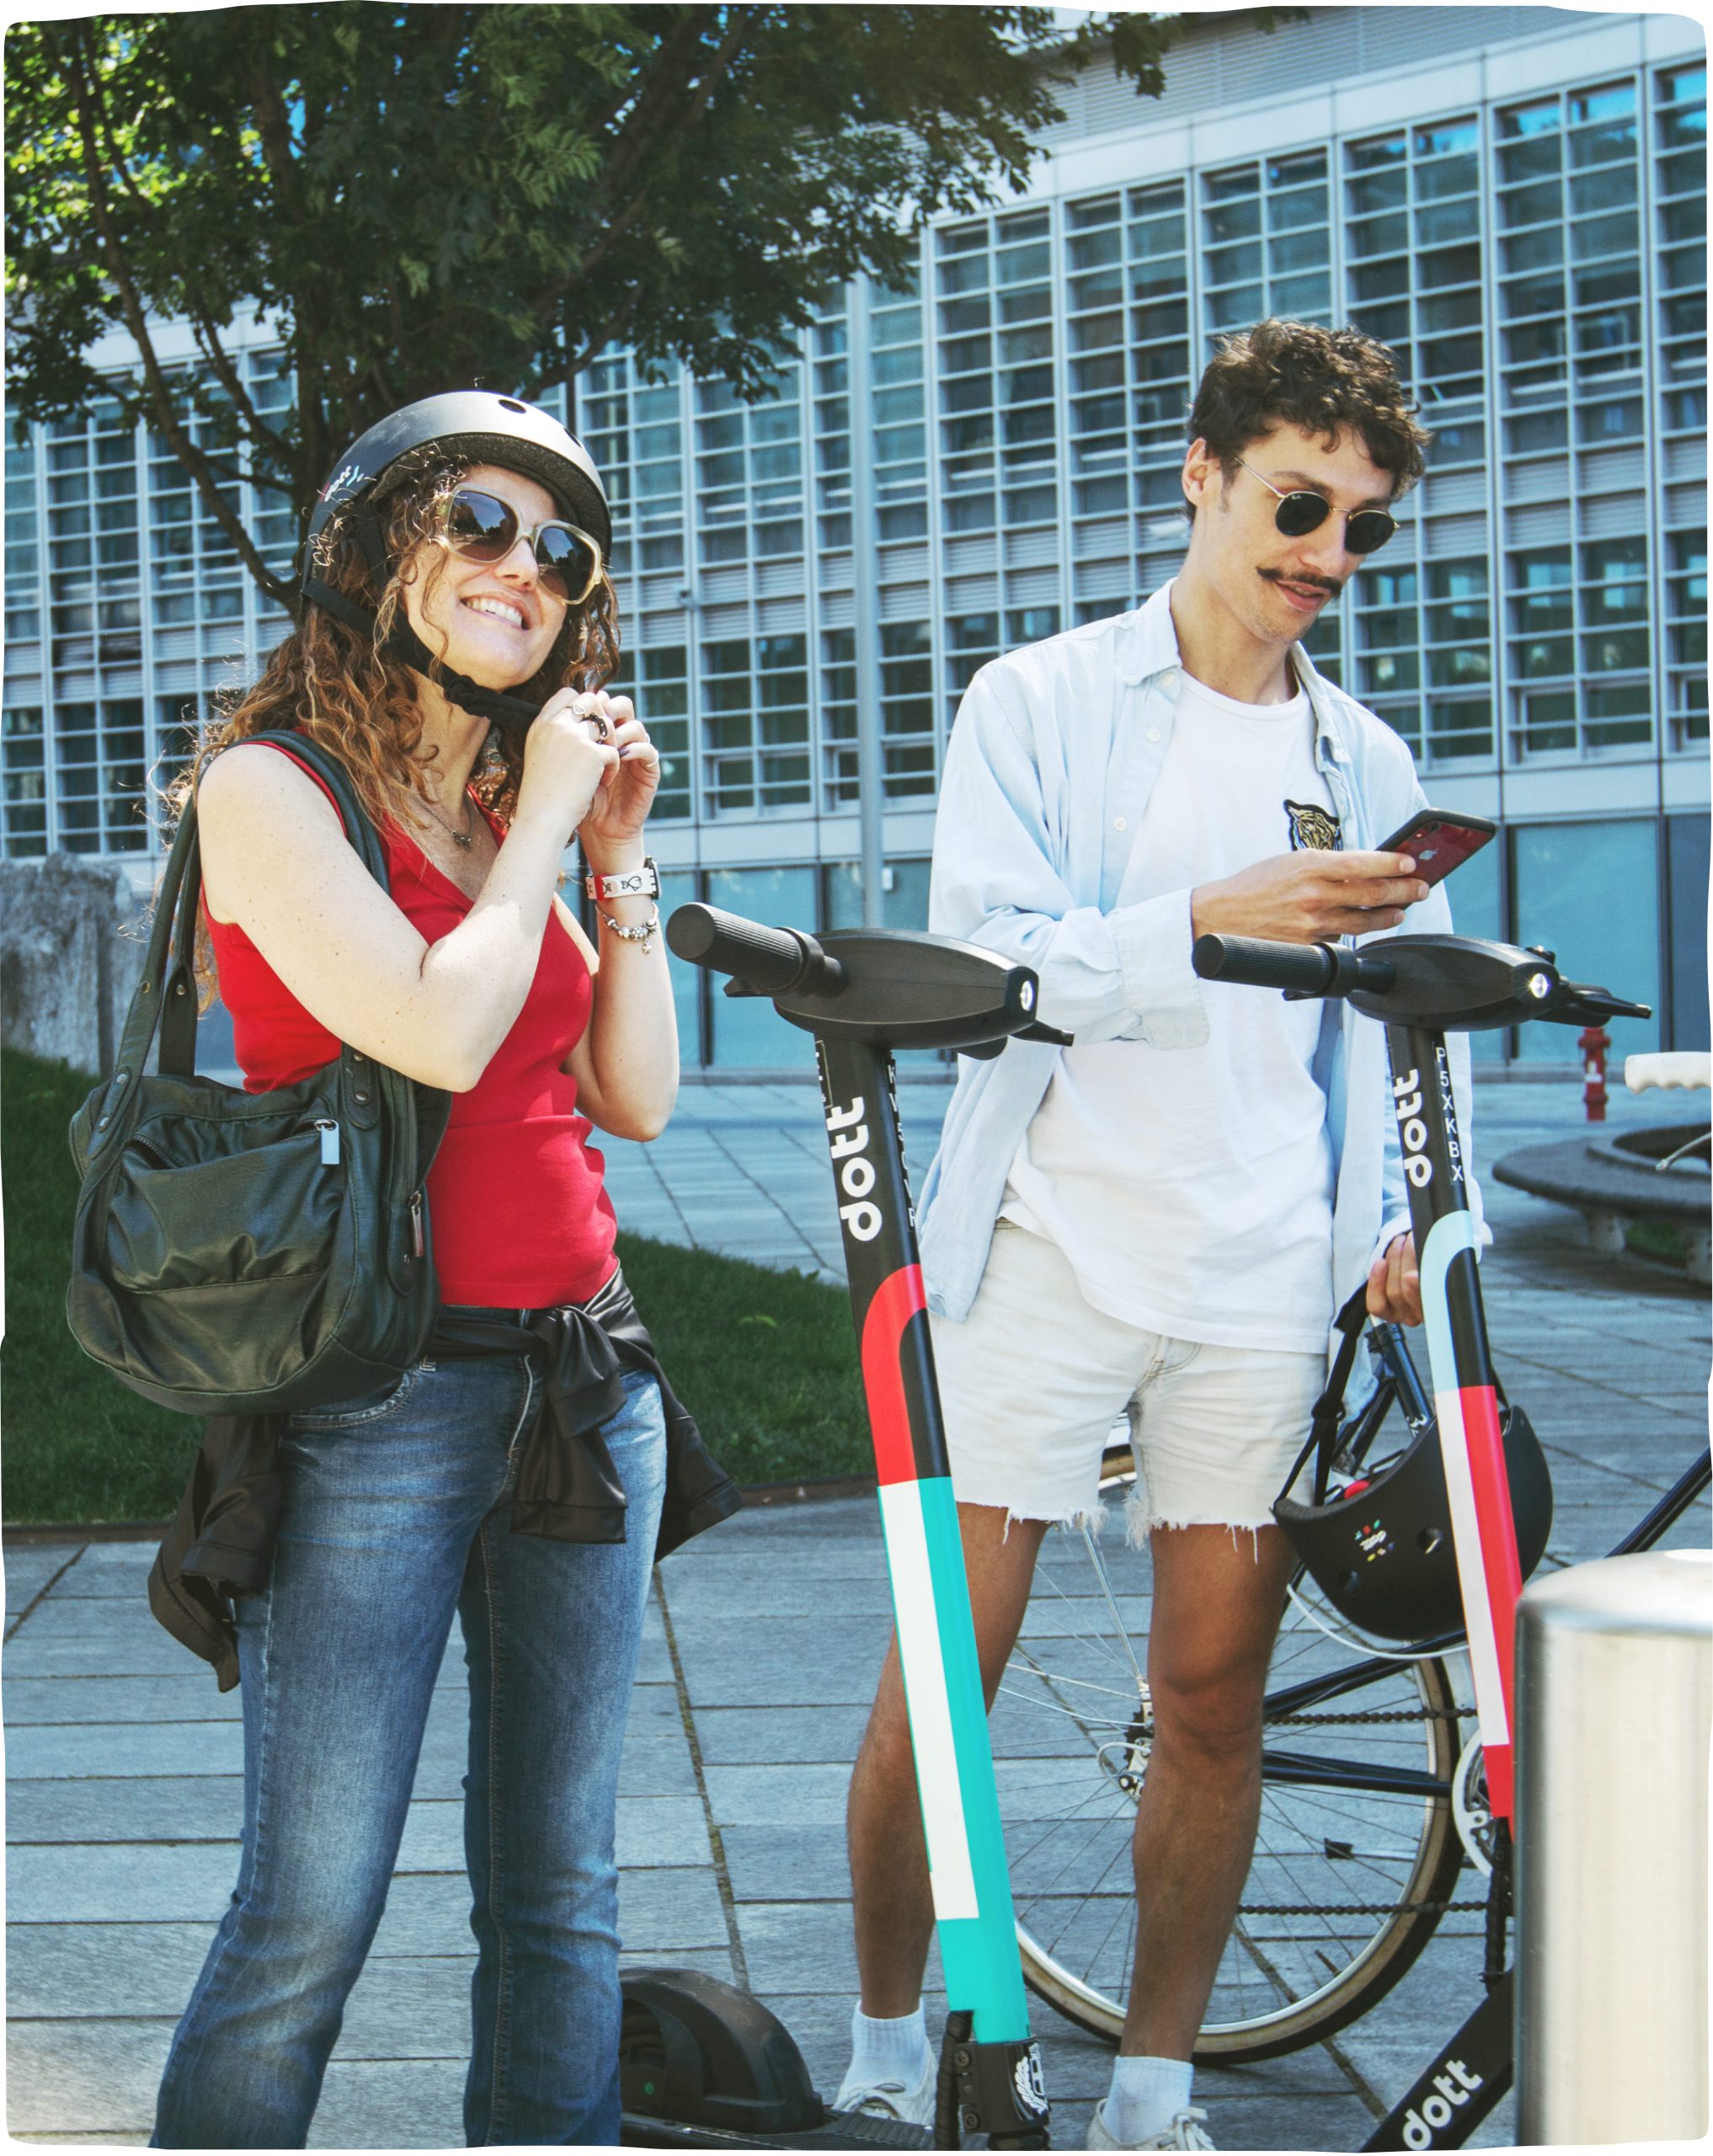 A man and woman rider in helmets and sunglasses, stopping to check their phone for tips on how to ride.